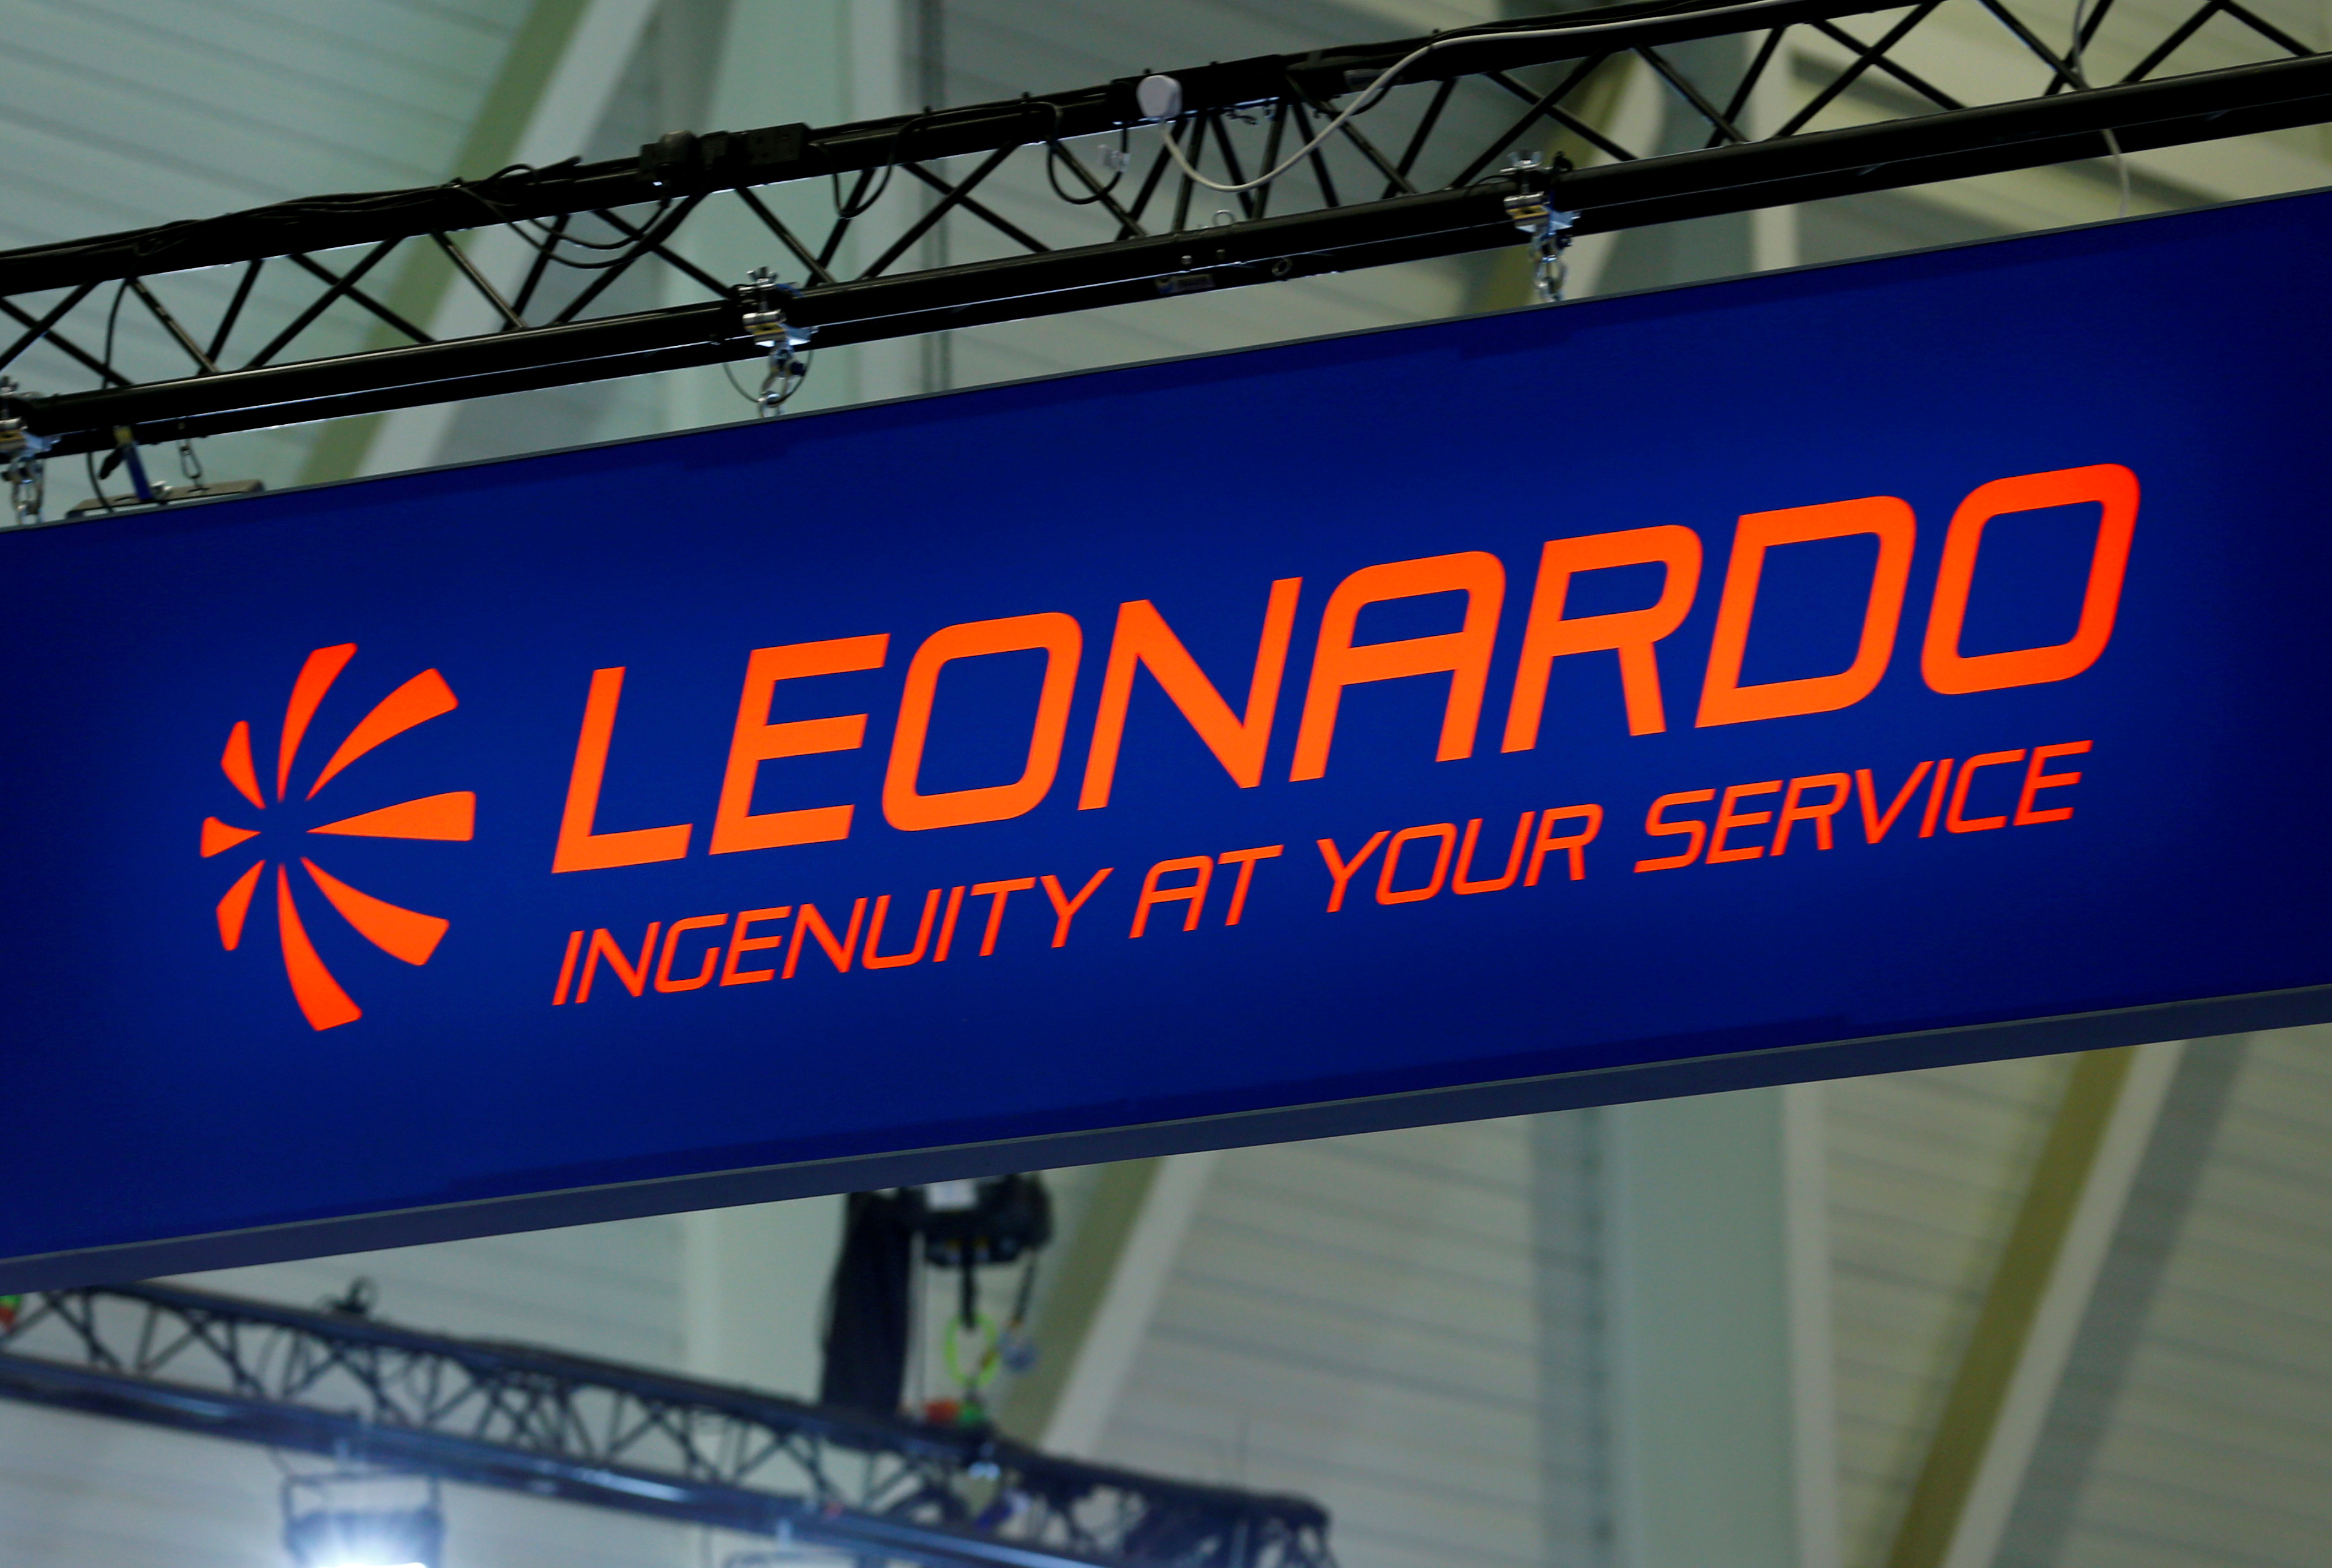 A logo of defence group Leonardo is pictured on their booth during the European Business Aviation Convention & Exhibition (EBACE) in Geneva, Switzerland, May 22, 2017. REUTERS/Denis Balibouse